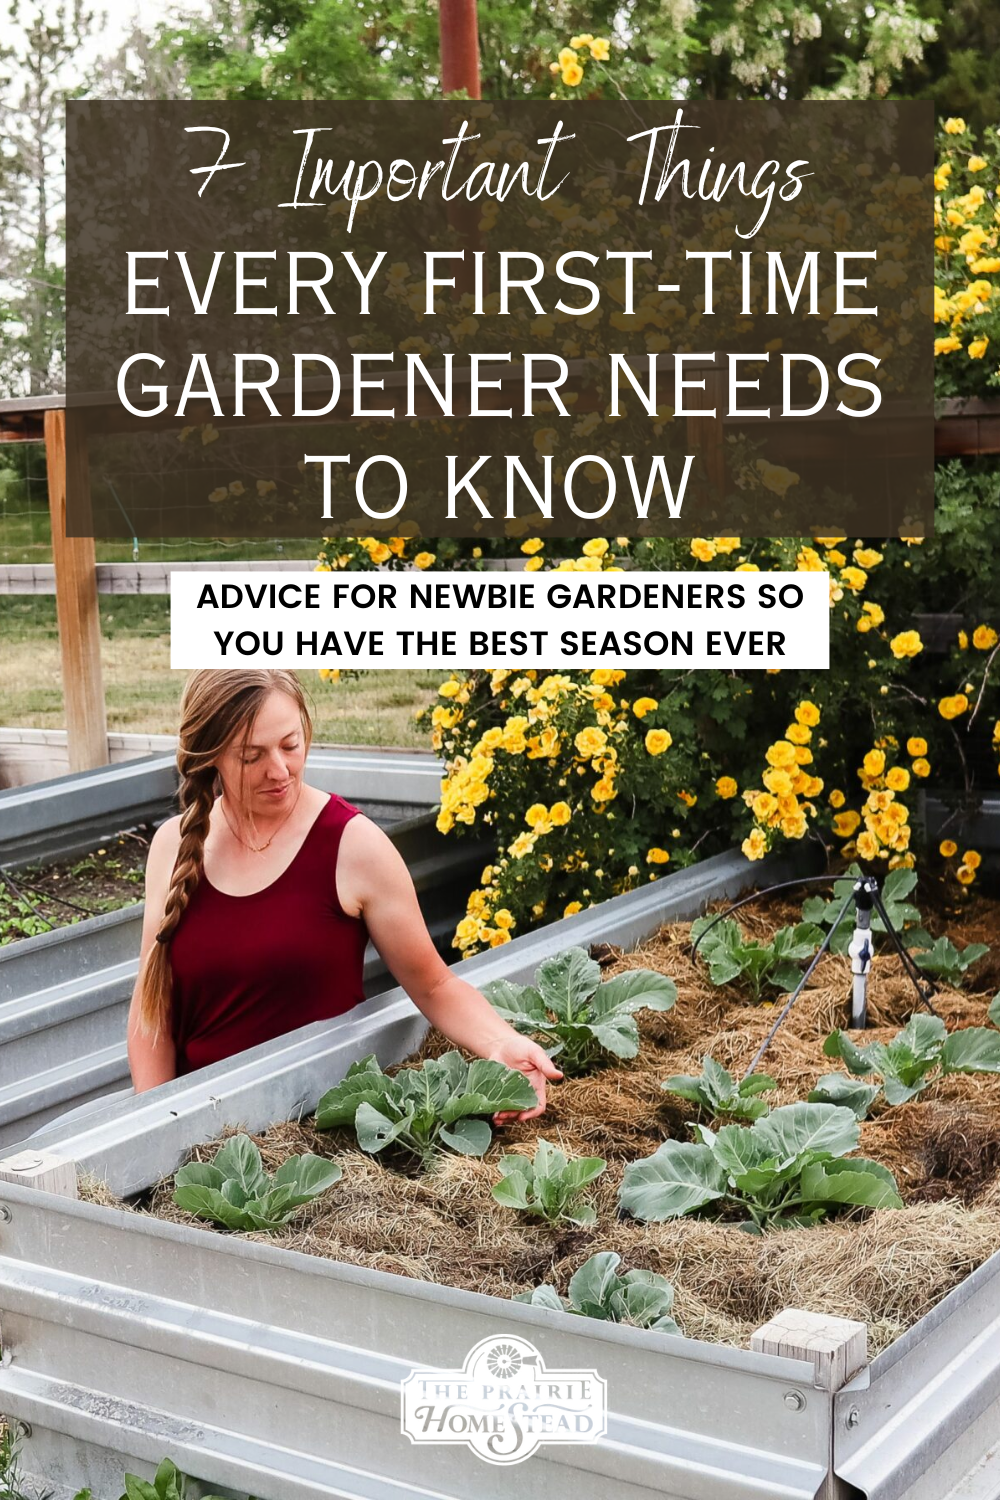 7 Important Things Every First-Time Gardener Needs to Know